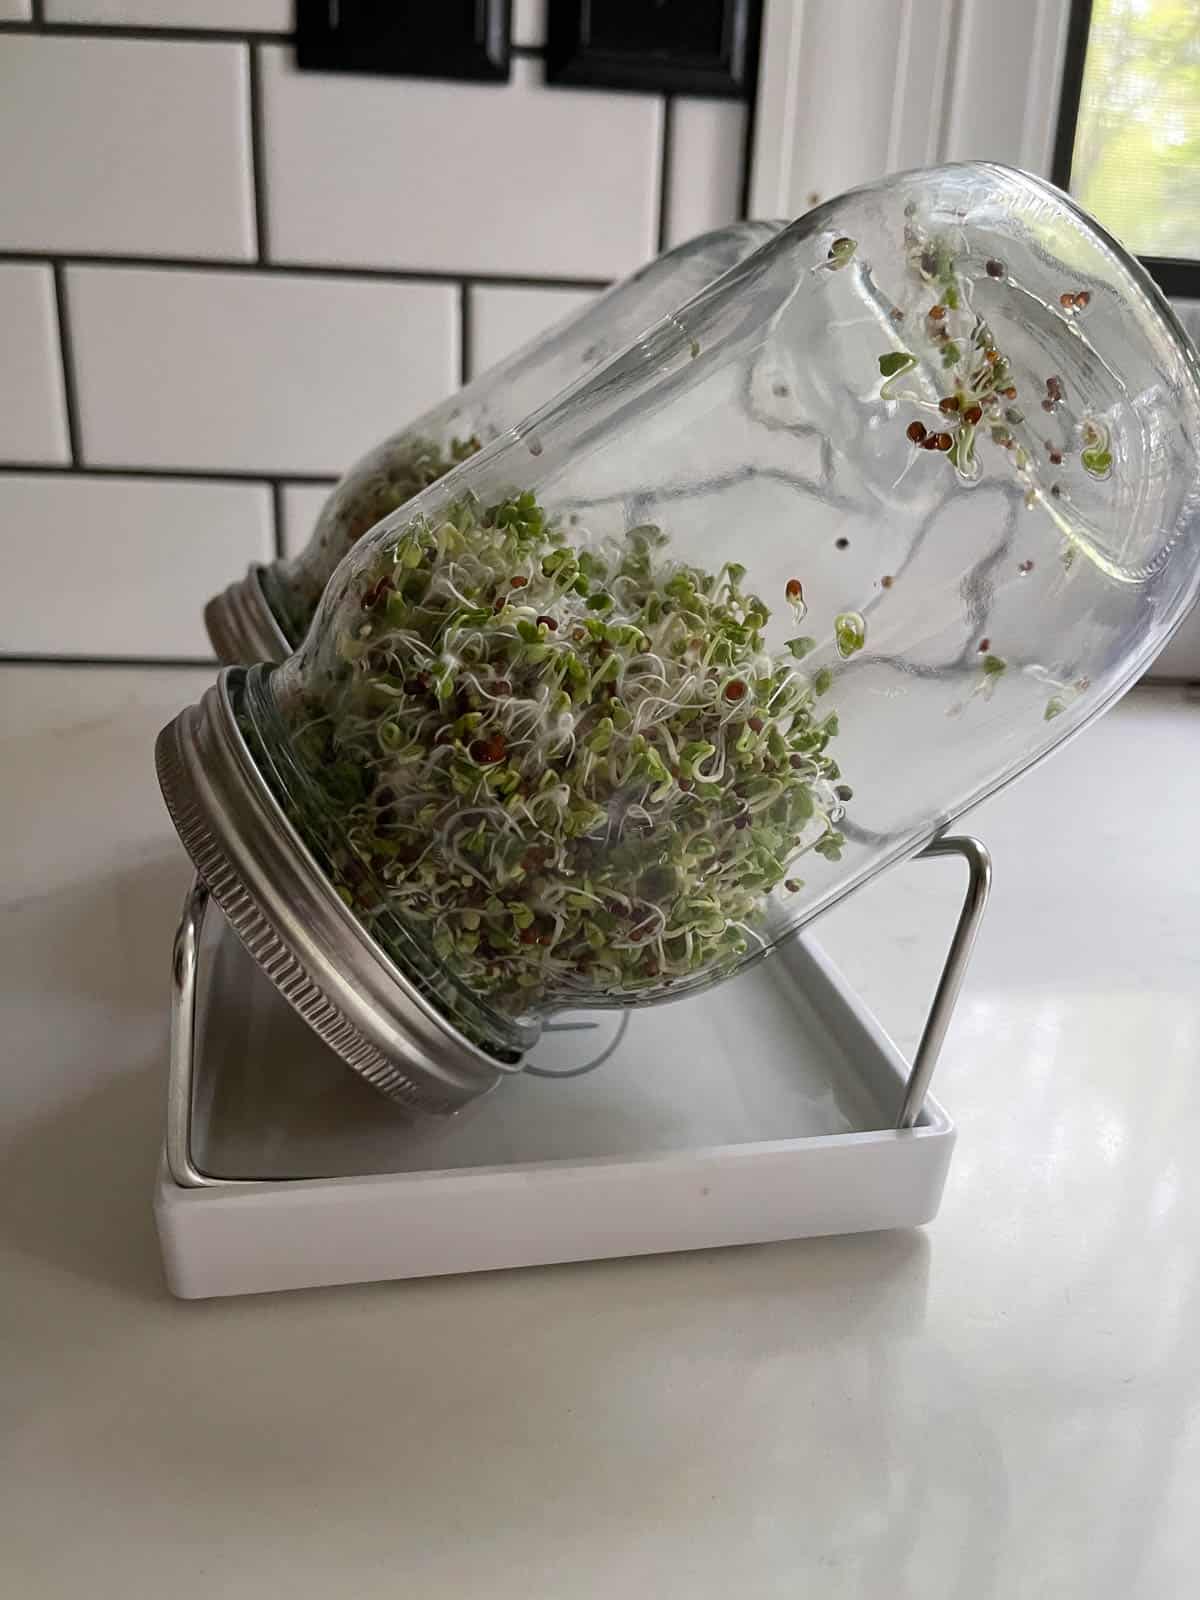 Sprouting jar with broccoli sprouts